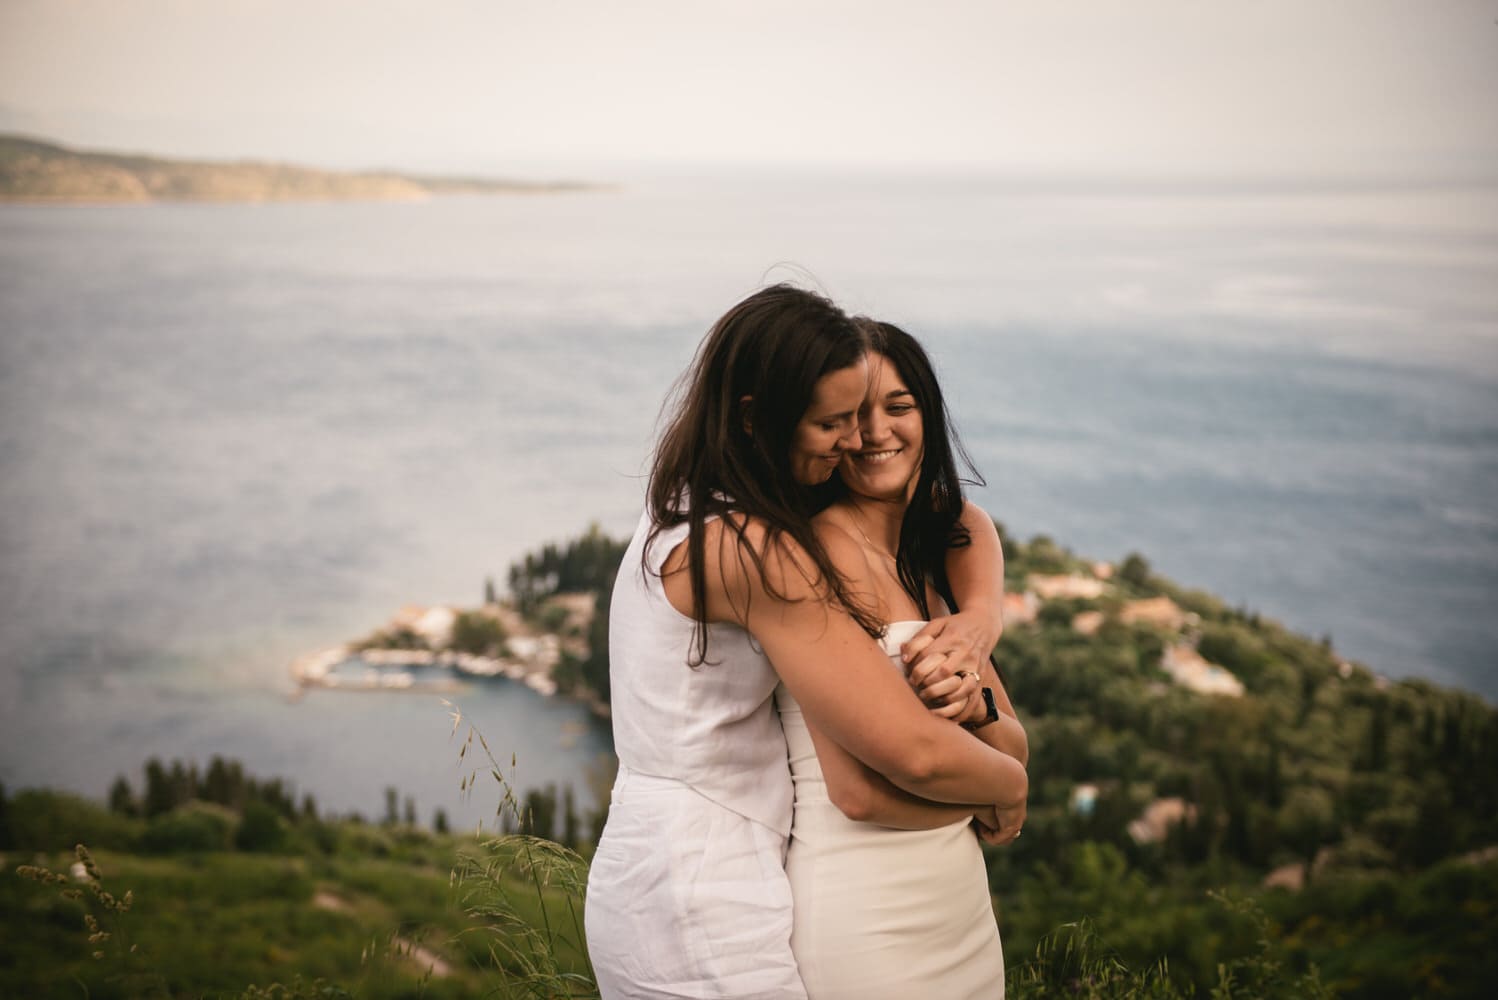 Seaside embrace: Brides walk along the shore, love's journey carried by the waves during their Corfu elopement.